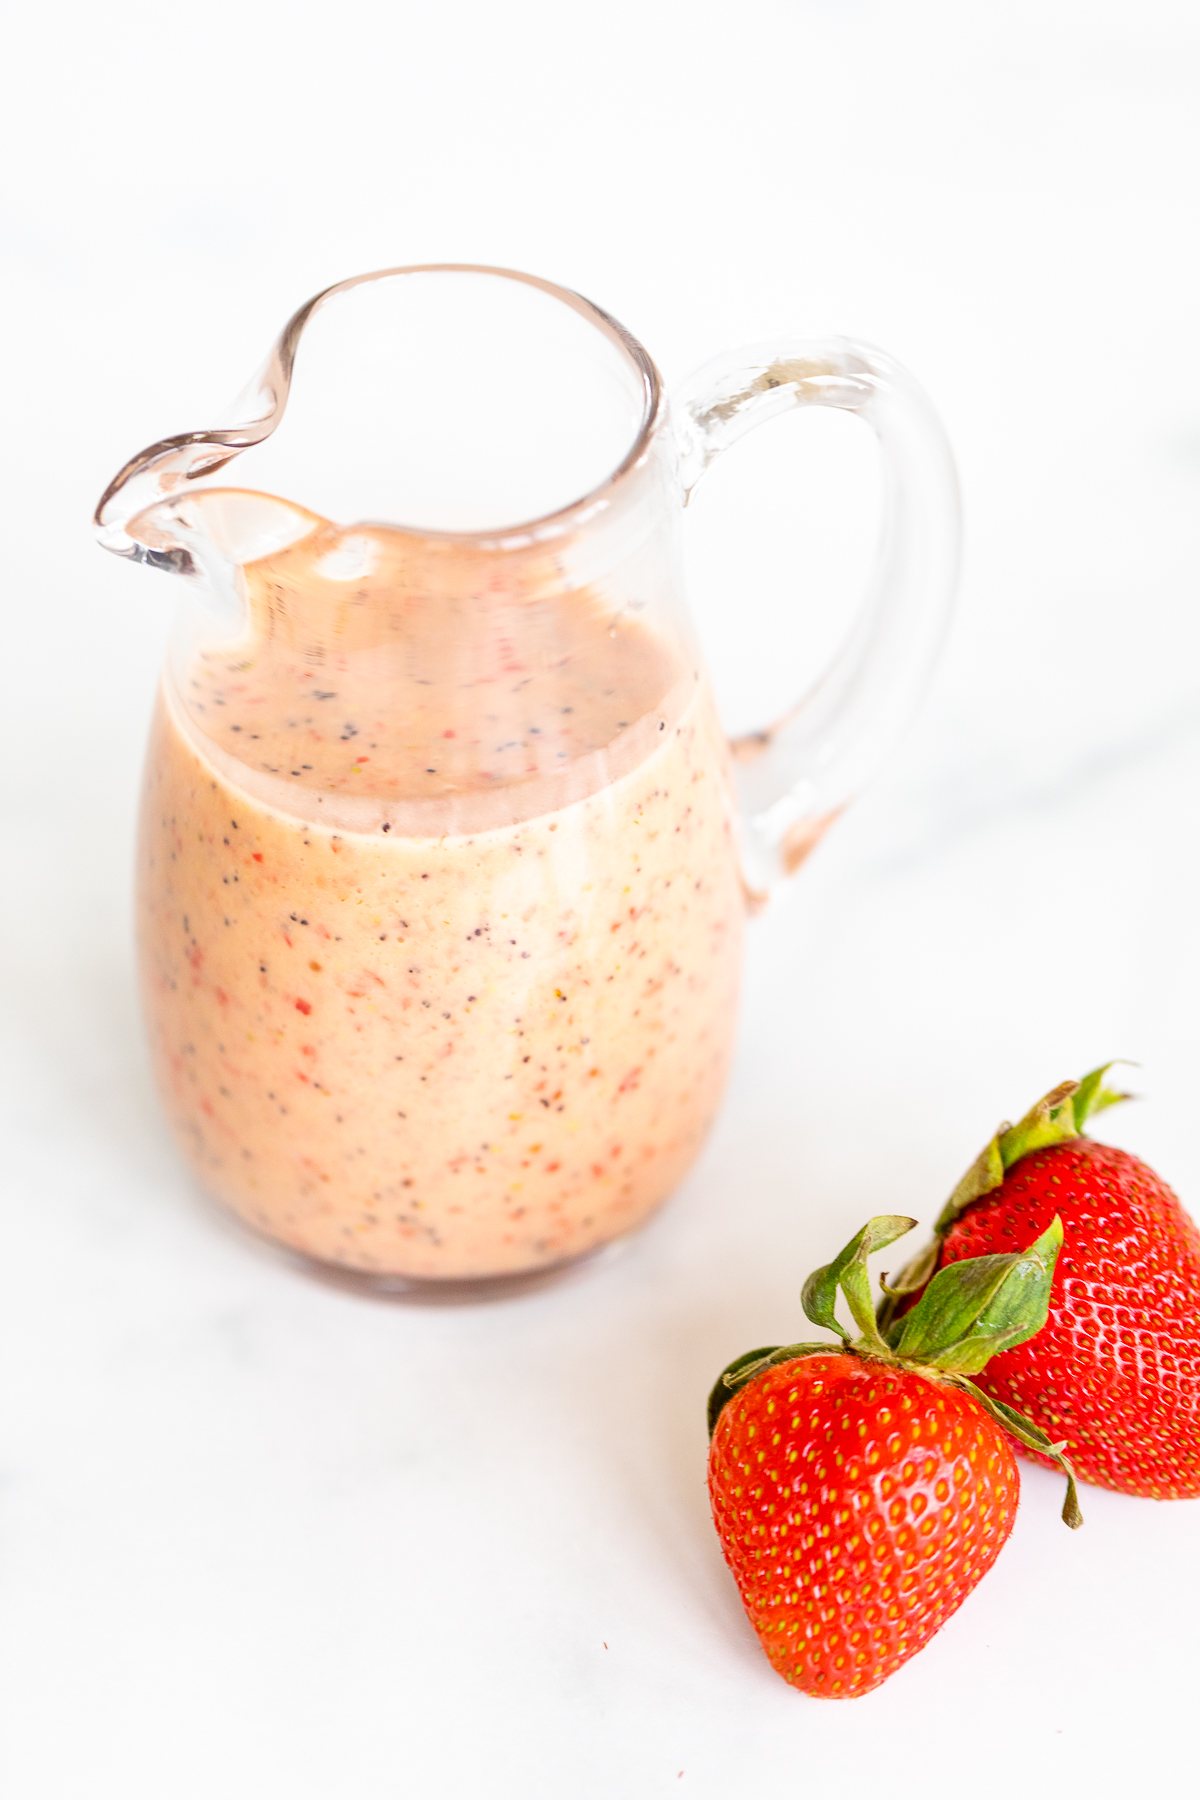 A glass jar of poppyseed dressing, with fresh strawberries next to it. 